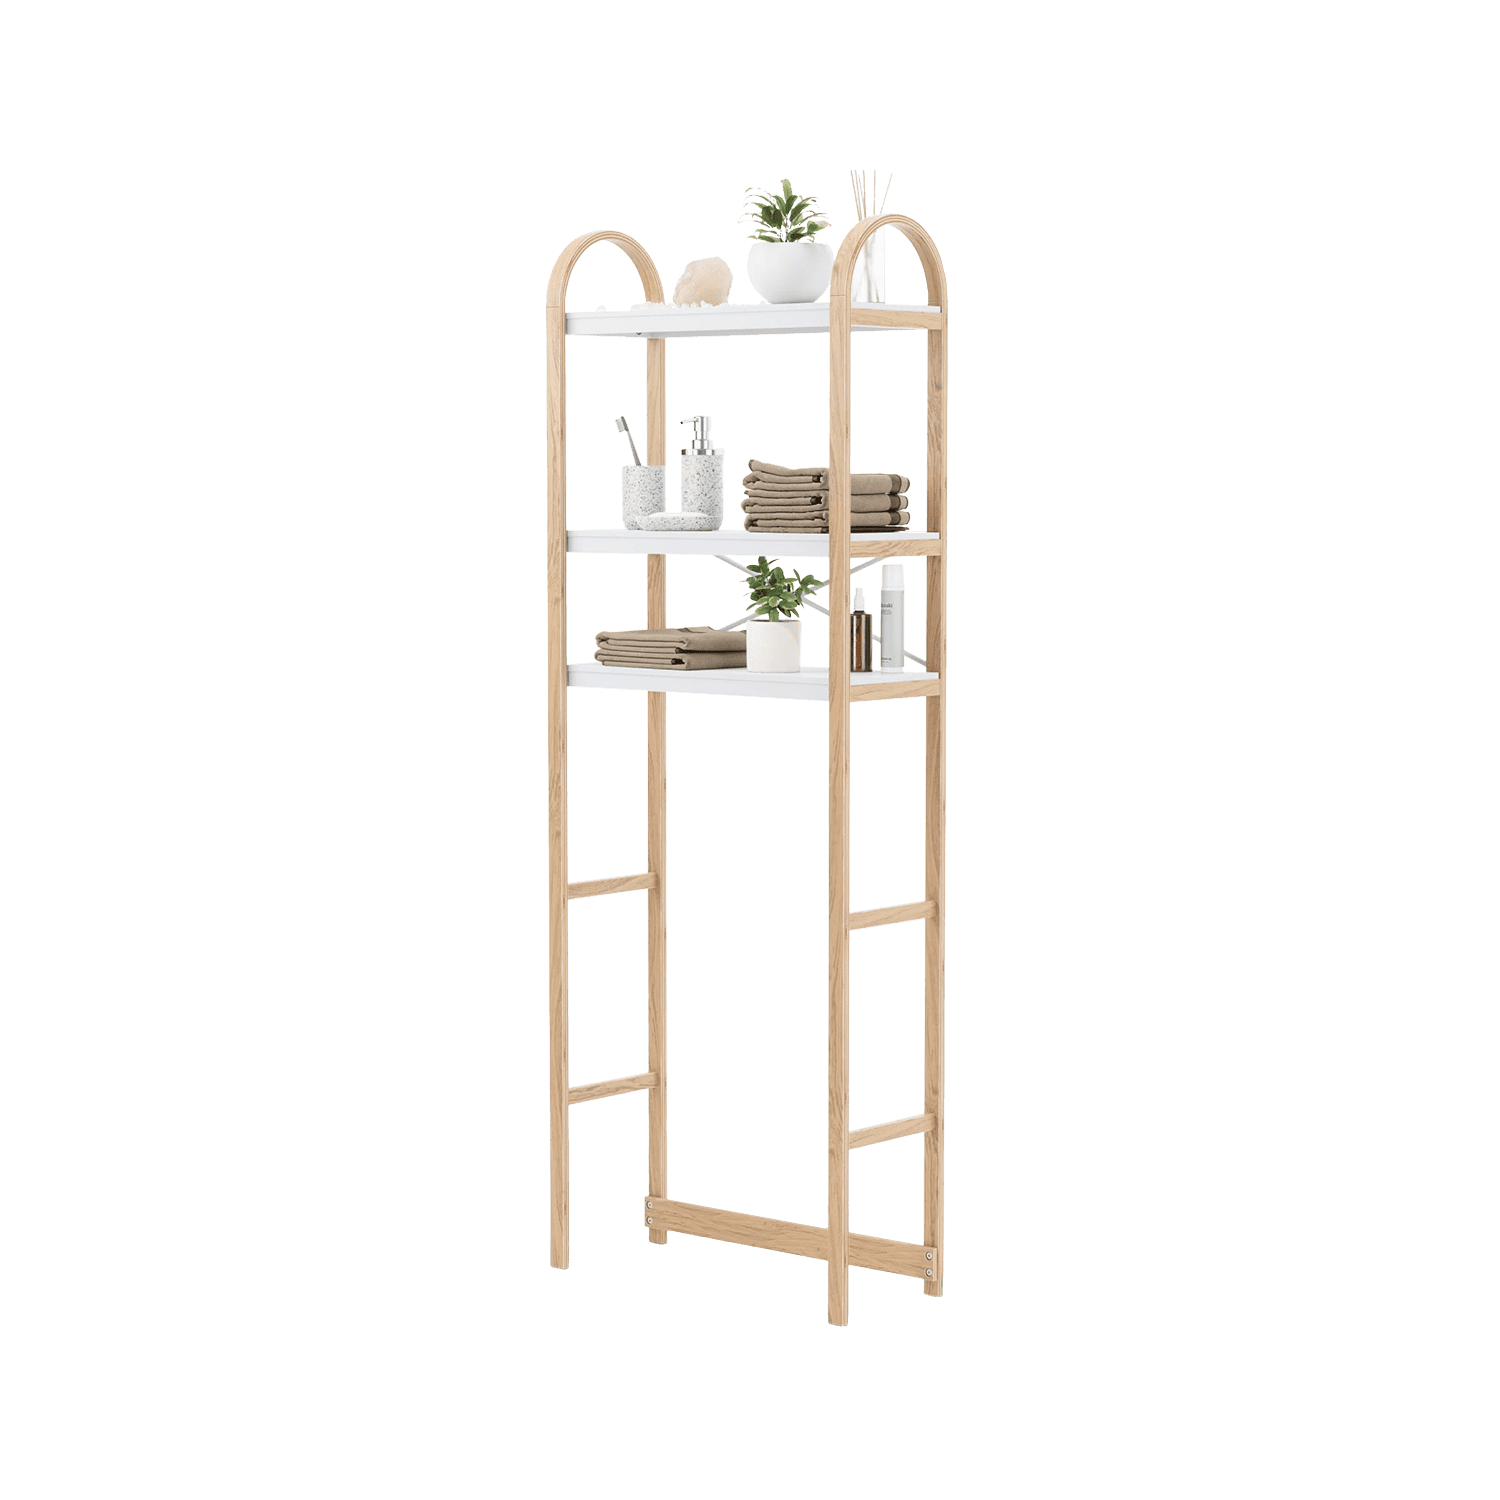 https://cdn.apartmenttherapy.info/image/upload/v1690818138/at/Org%20Awards%202023/products/bellwood-over-toilet-shelf.png